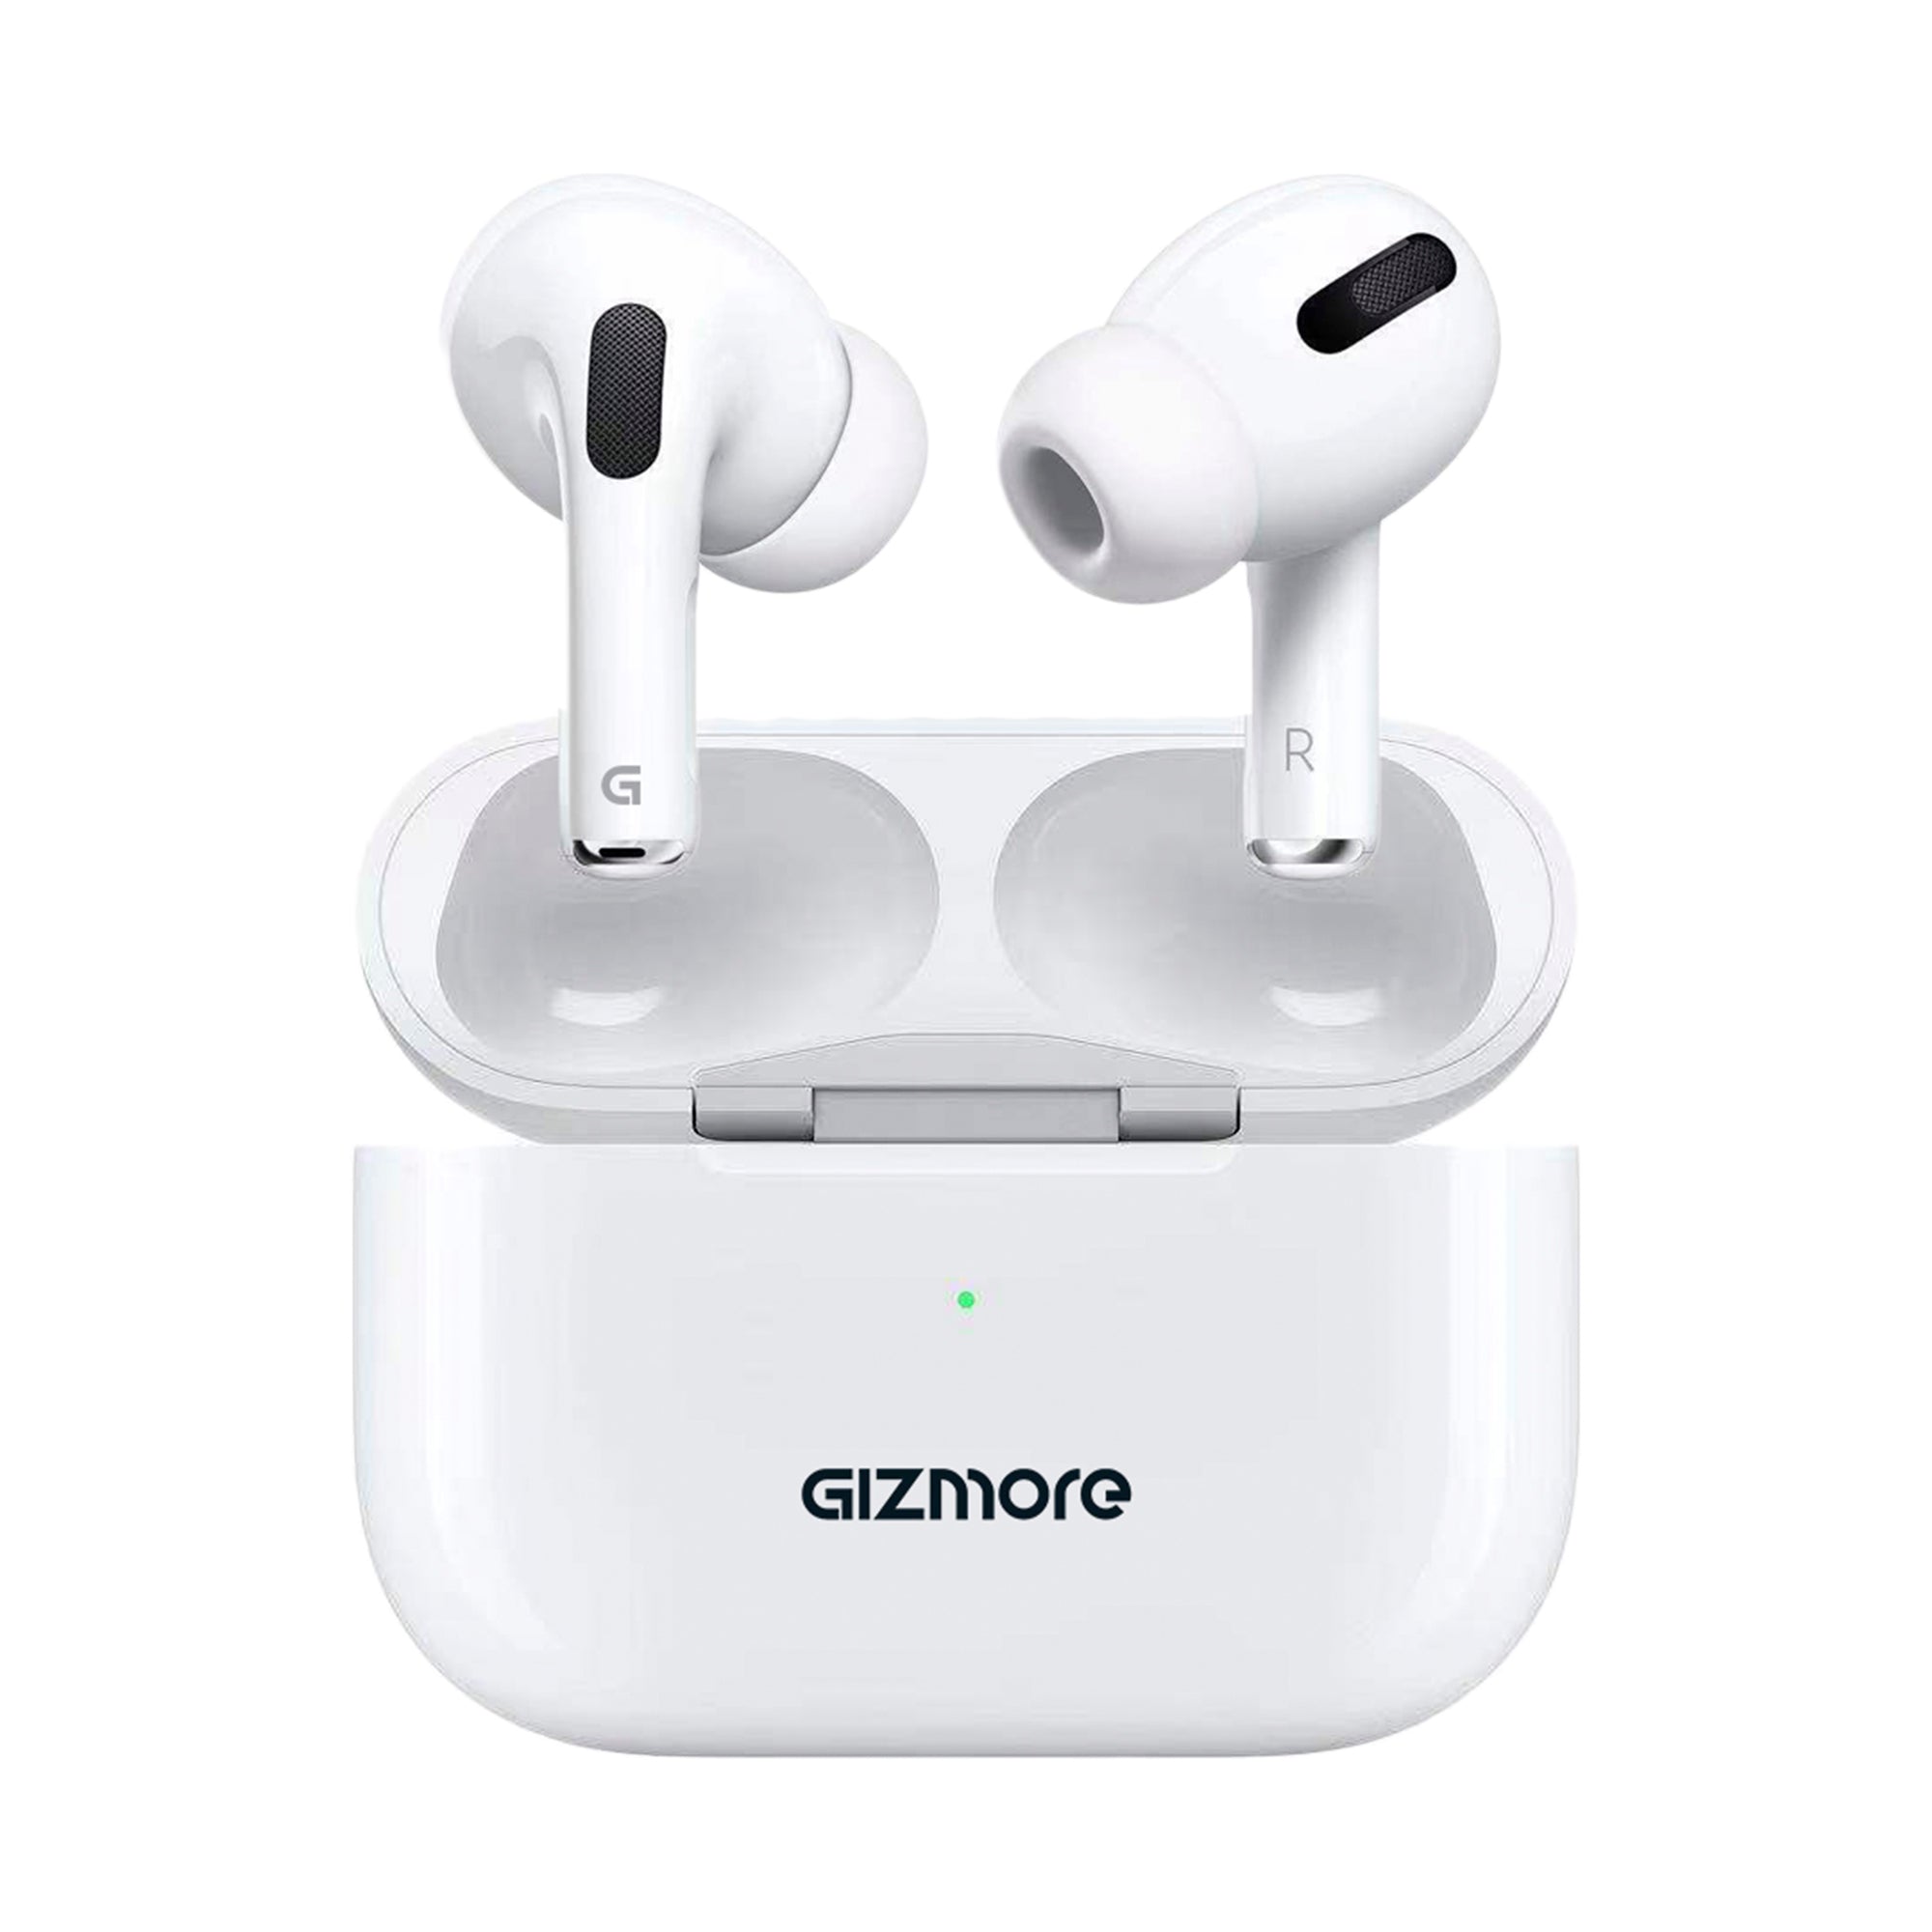 GIZMORE Gizbud 851 Bluetooth 5.0 in-Ear Wireless Earbuds with Noise Isolation | 12 Hrs Playtime, Touch Control, and Voice Assistance